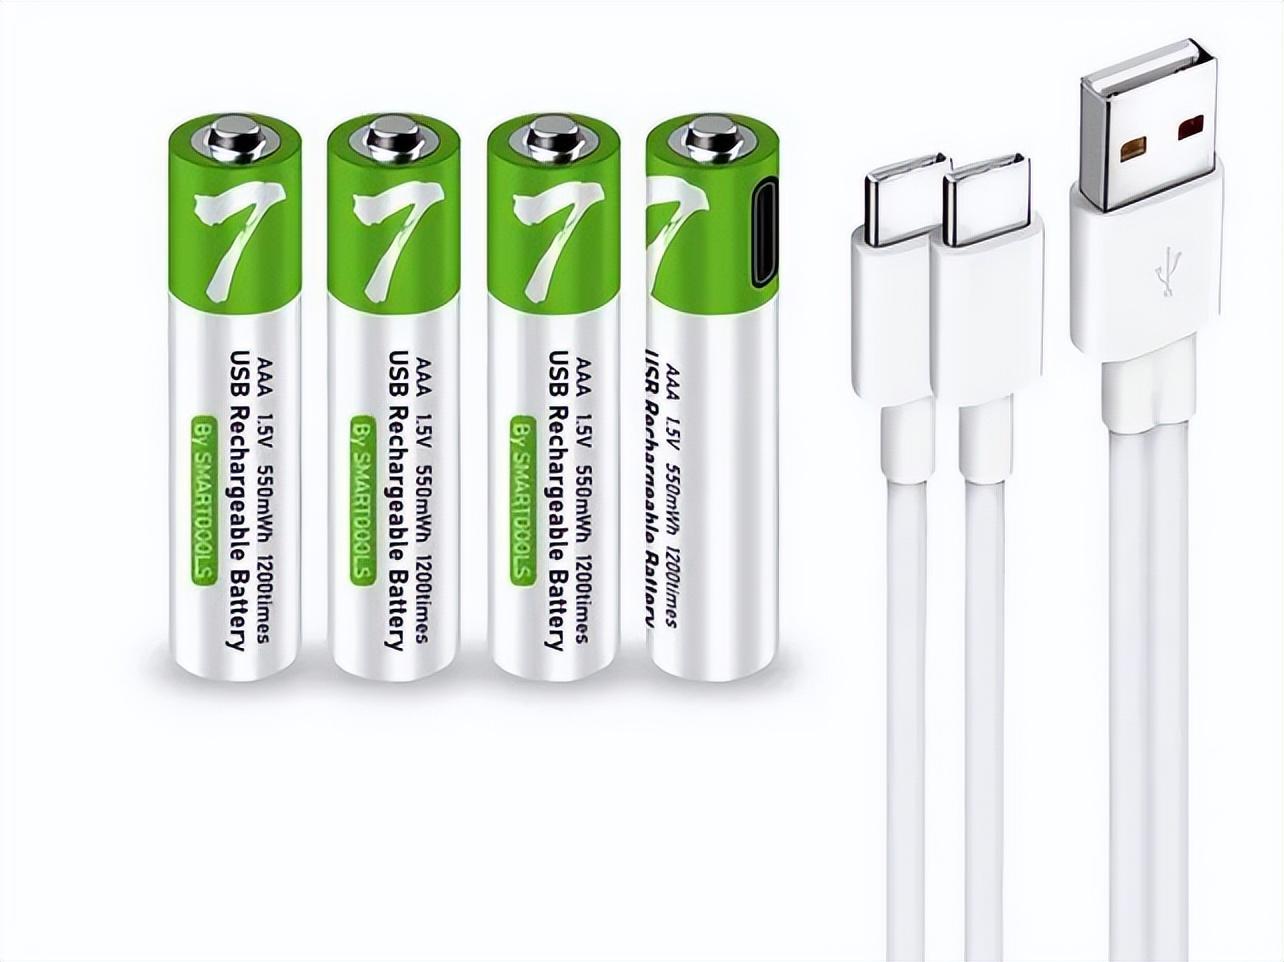 Which is more cost-effective for household use, rechargeable battery or ordinary battery?